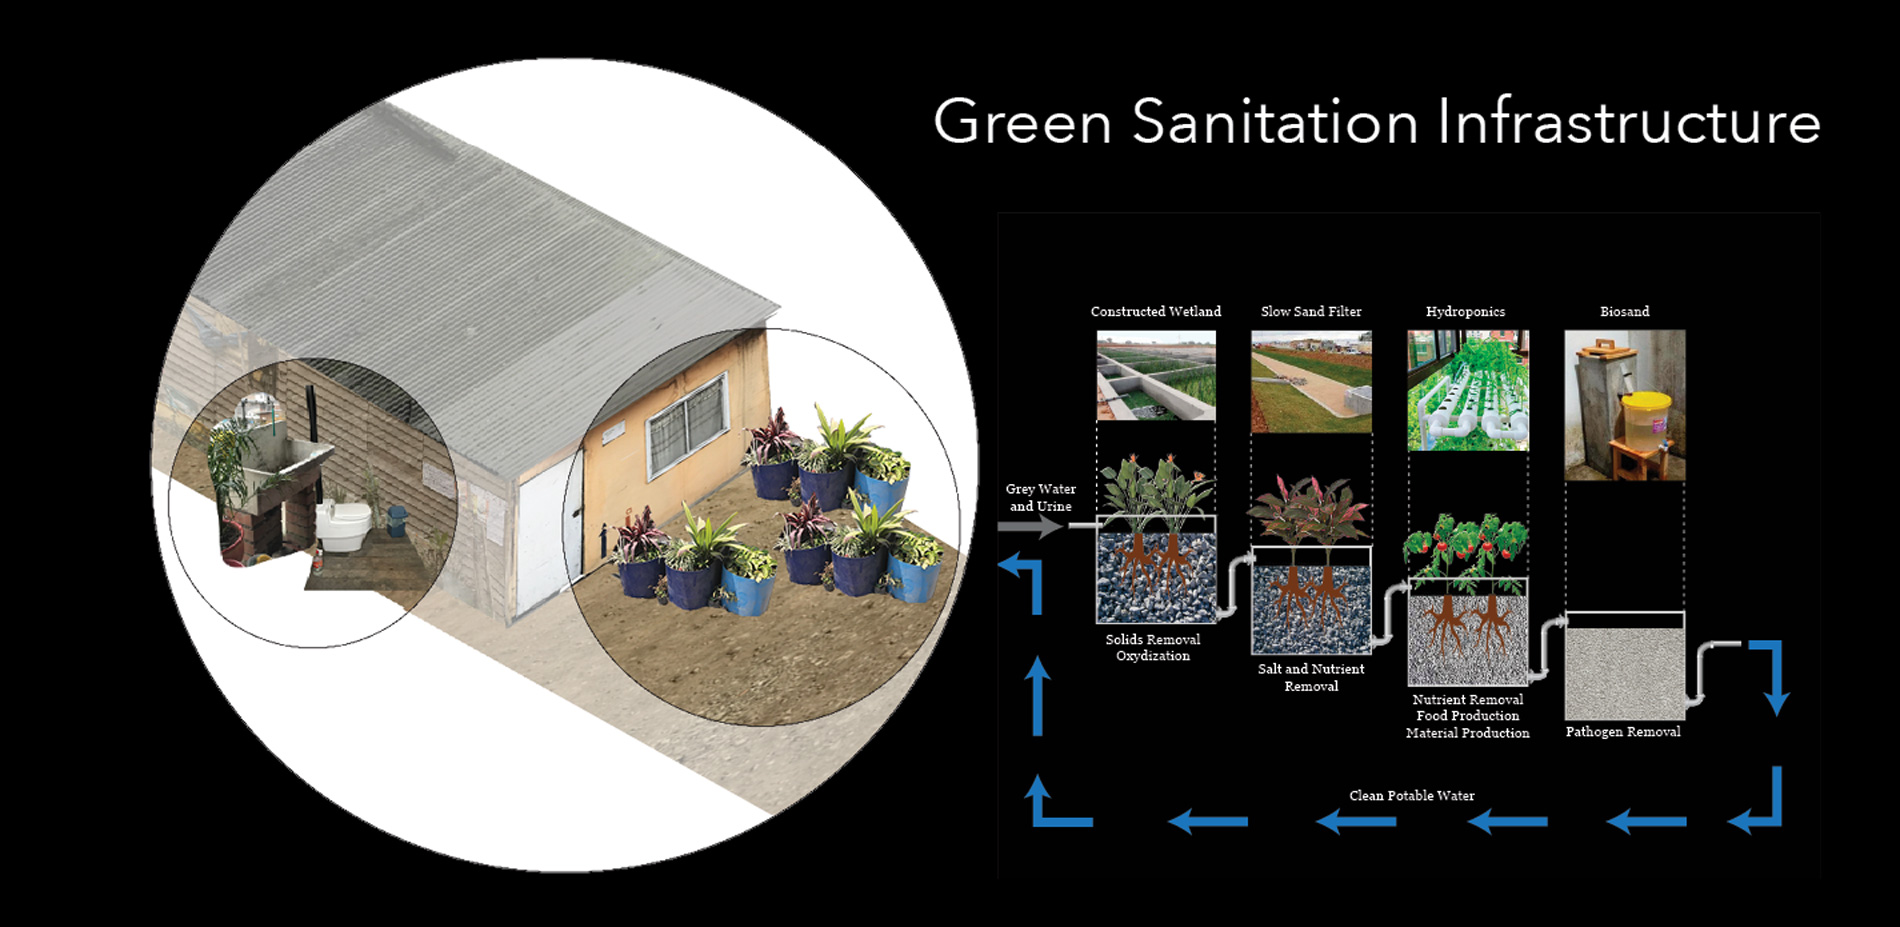 Sanitary greenspace for the home